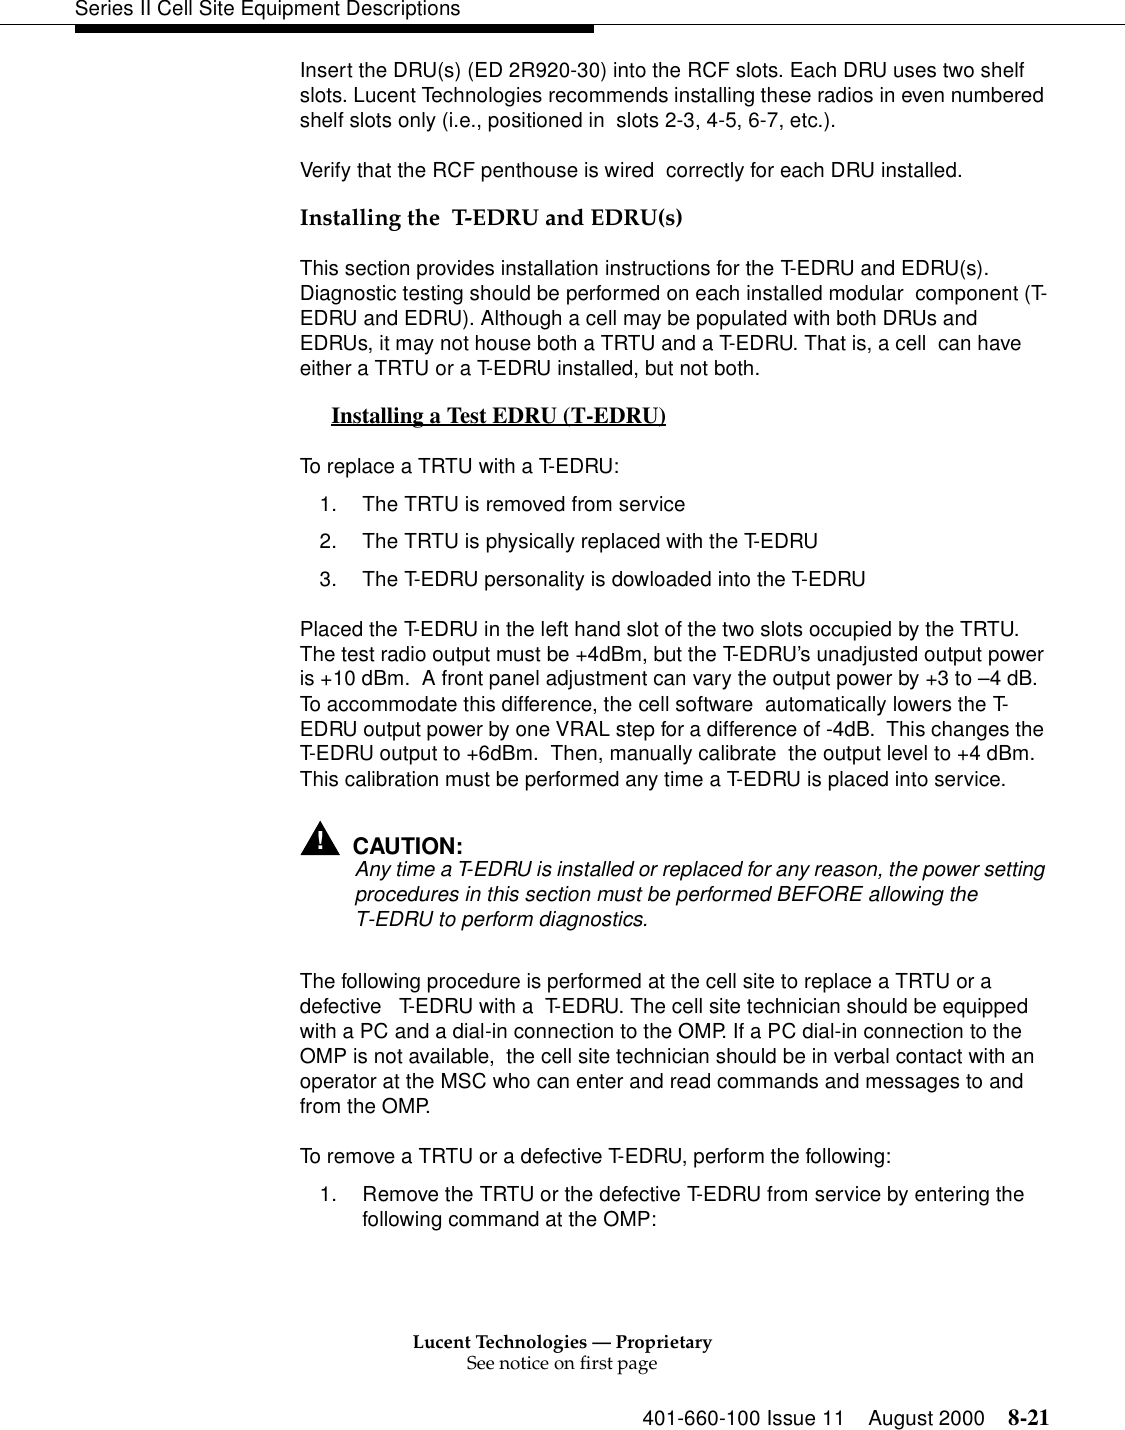 Lucent Technologies — ProprietarySee notice on first page401-660-100 Issue 11 August 2000 8-21Series II Cell Site Equipment DescriptionsInsert the DRU(s) (ED 2R920-30) into the RCF slots. Each DRU uses two shelf slots. Lucent Technologies recommends installing these radios in even numbered shelf slots only (i.e., positioned in  slots 2-3, 4-5, 6-7, etc.).Verify that the RCF penthouse is wired  correctly for each DRU installed.Installing the  T-EDRU and EDRU(s)This section provides installation instructions for the T-EDRU and EDRU(s). Diagnostic testing should be performed on each installed modular  component (T-EDRU and EDRU). Although a cell may be populated with both DRUs and EDRUs, it may not house both a TRTU and a T-EDRU. That is, a cell  can have either a TRTU or a T-EDRU installed, but not both.Installing a Test EDRU (T-EDRU) 0To replace a TRTU with a T-EDRU:1. The TRTU is removed from service2. The TRTU is physically replaced with the T-EDRU3. The T-EDRU personality is dowloaded into the T-EDRUPlaced the T-EDRU in the left hand slot of the two slots occupied by the TRTU. The test radio output must be +4dBm, but the T-EDRU’s unadjusted output power is +10 dBm.  A front panel adjustment can vary the output power by +3 to –4 dB.  To accommodate this difference, the cell software  automatically lowers the T-EDRU output power by one VRAL step for a difference of -4dB.  This changes the T-EDRU output to +6dBm.  Then, manually calibrate  the output level to +4 dBm.  This calibration must be performed any time a T-EDRU is placed into service. !CAUTION:Any time a T-EDRU is installed or replaced for any reason, the power setting procedures in this section must be performed BEFORE allowing the T-EDRU to perform diagnostics.The following procedure is performed at the cell site to replace a TRTU or a defective   T-EDRU with a  T-EDRU. The cell site technician should be equipped with a PC and a dial-in connection to the OMP. If a PC dial-in connection to the OMP is not available,  the cell site technician should be in verbal contact with an operator at the MSC who can enter and read commands and messages to and from the OMP. To remove a TRTU or a defective T-EDRU, perform the following:1. Remove the TRTU or the defective T-EDRU from service by entering the following command at the OMP: